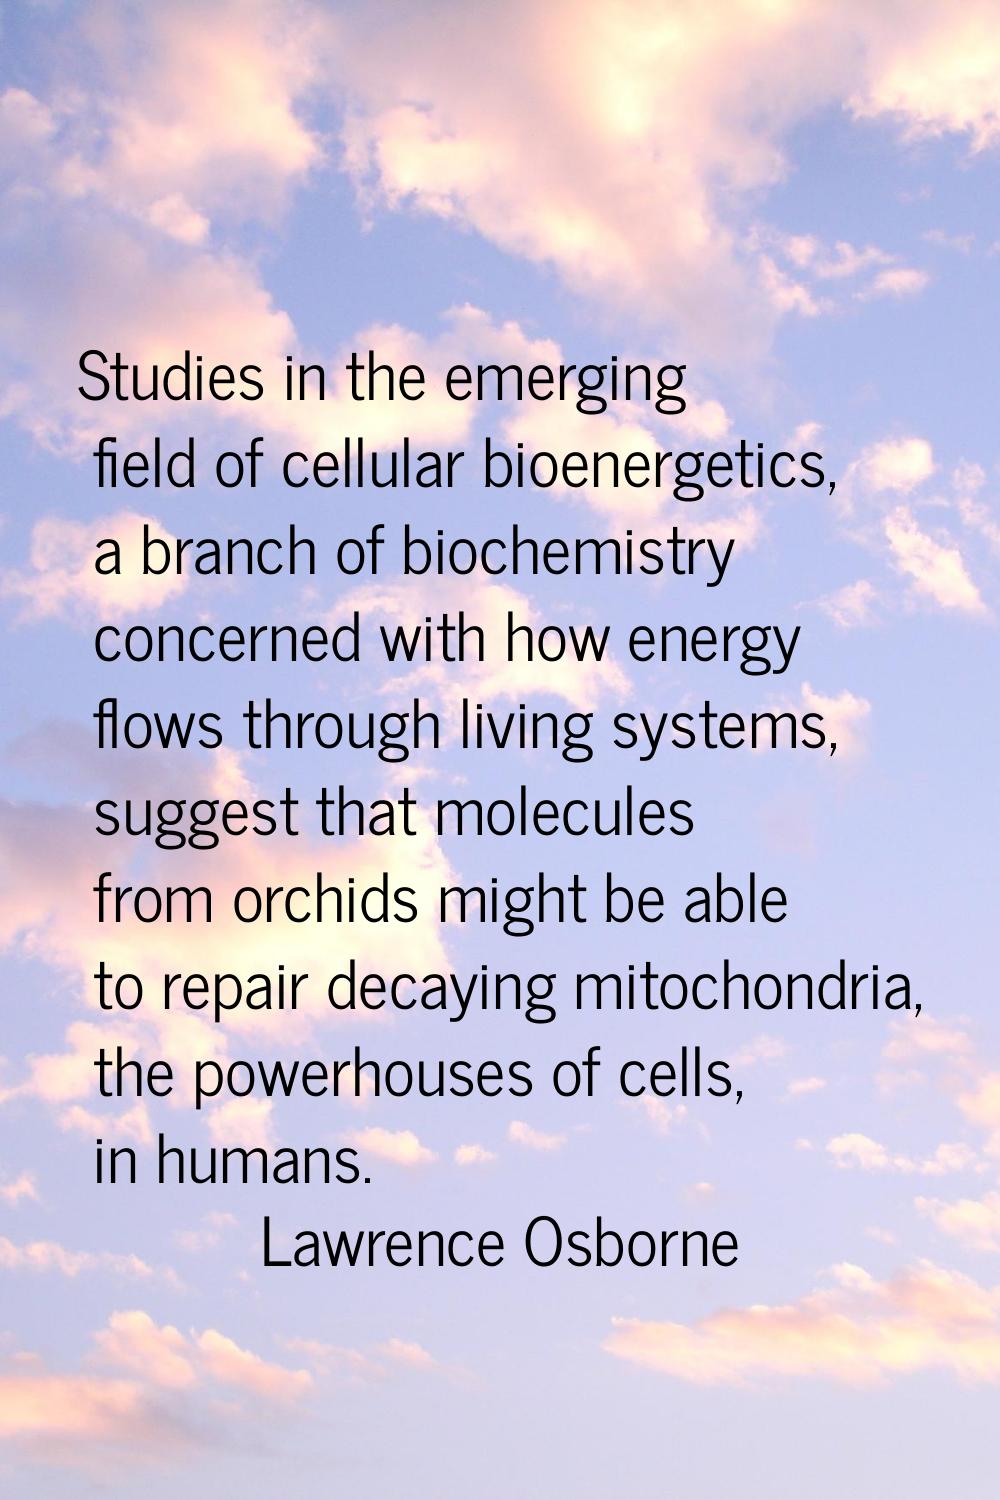 Studies in the emerging field of cellular bioenergetics, a branch of biochemistry concerned with ho